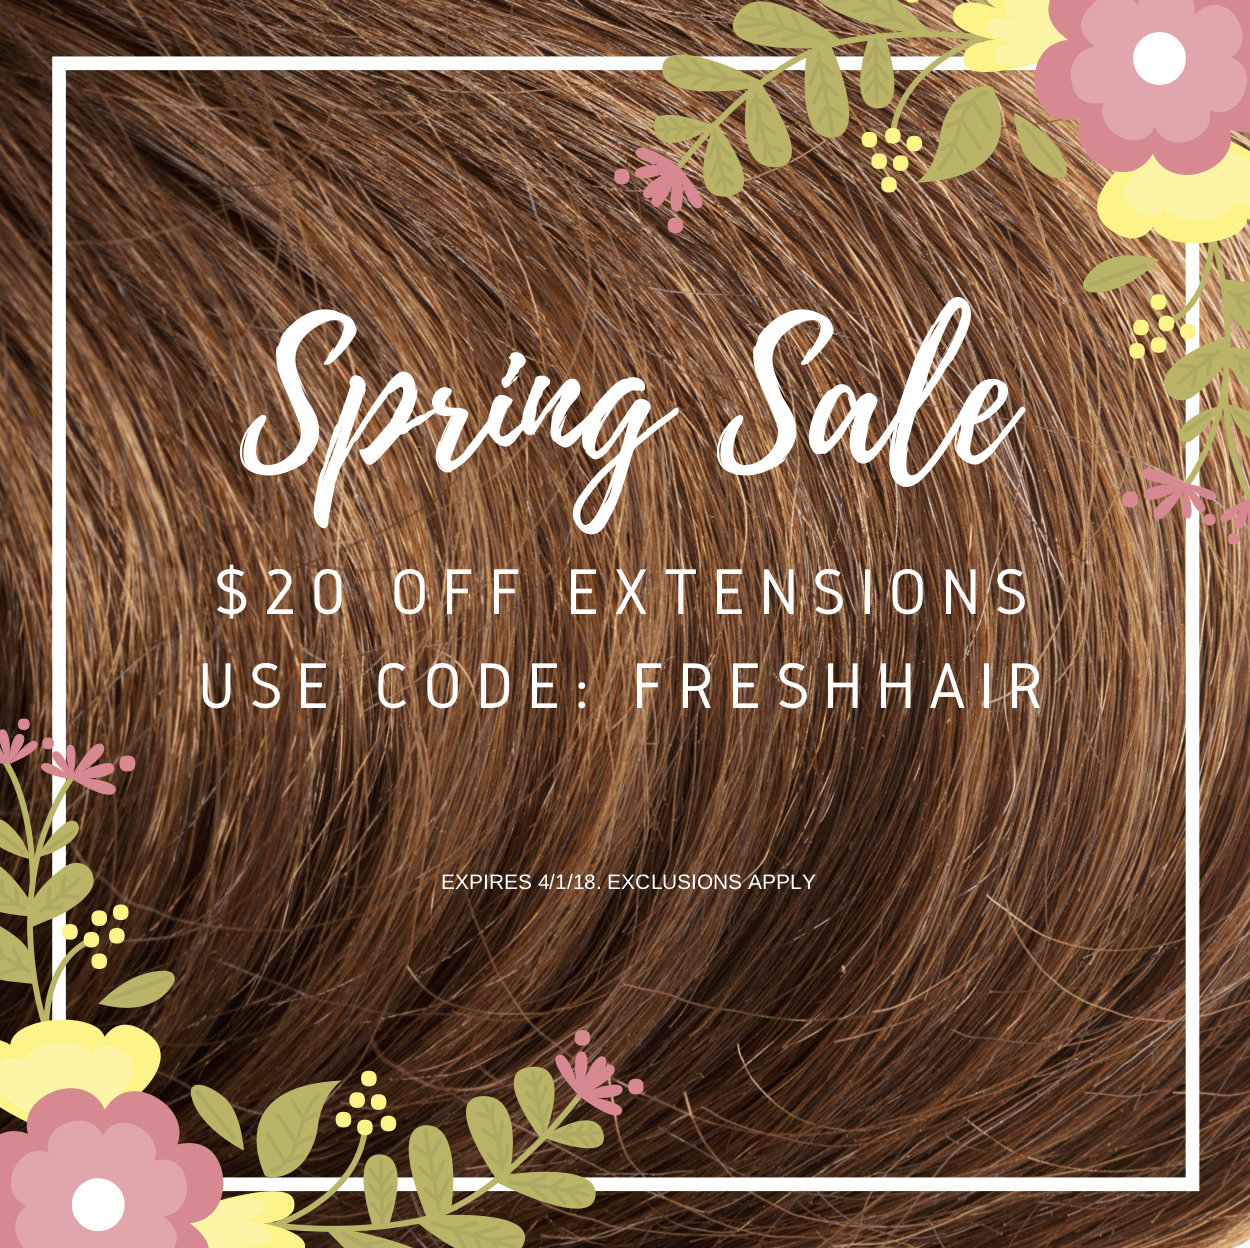 Cashmere Hair Spring Sale $20 off